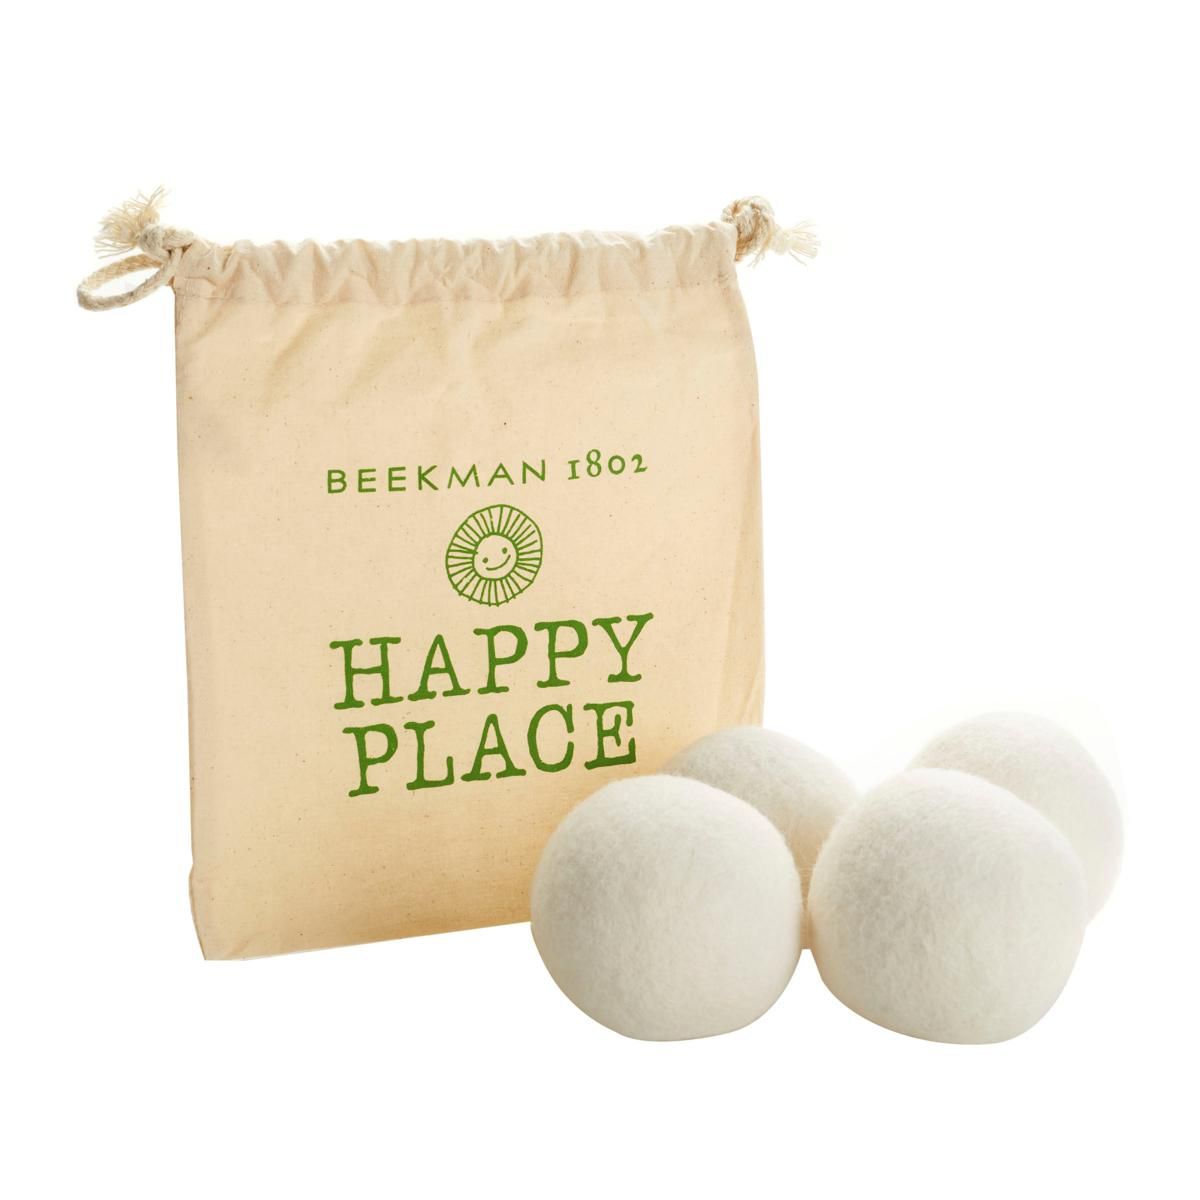 Happy Place Set of 4 Wool Dryer Balls with Storage Bag - 9474873 | HSN | HSN